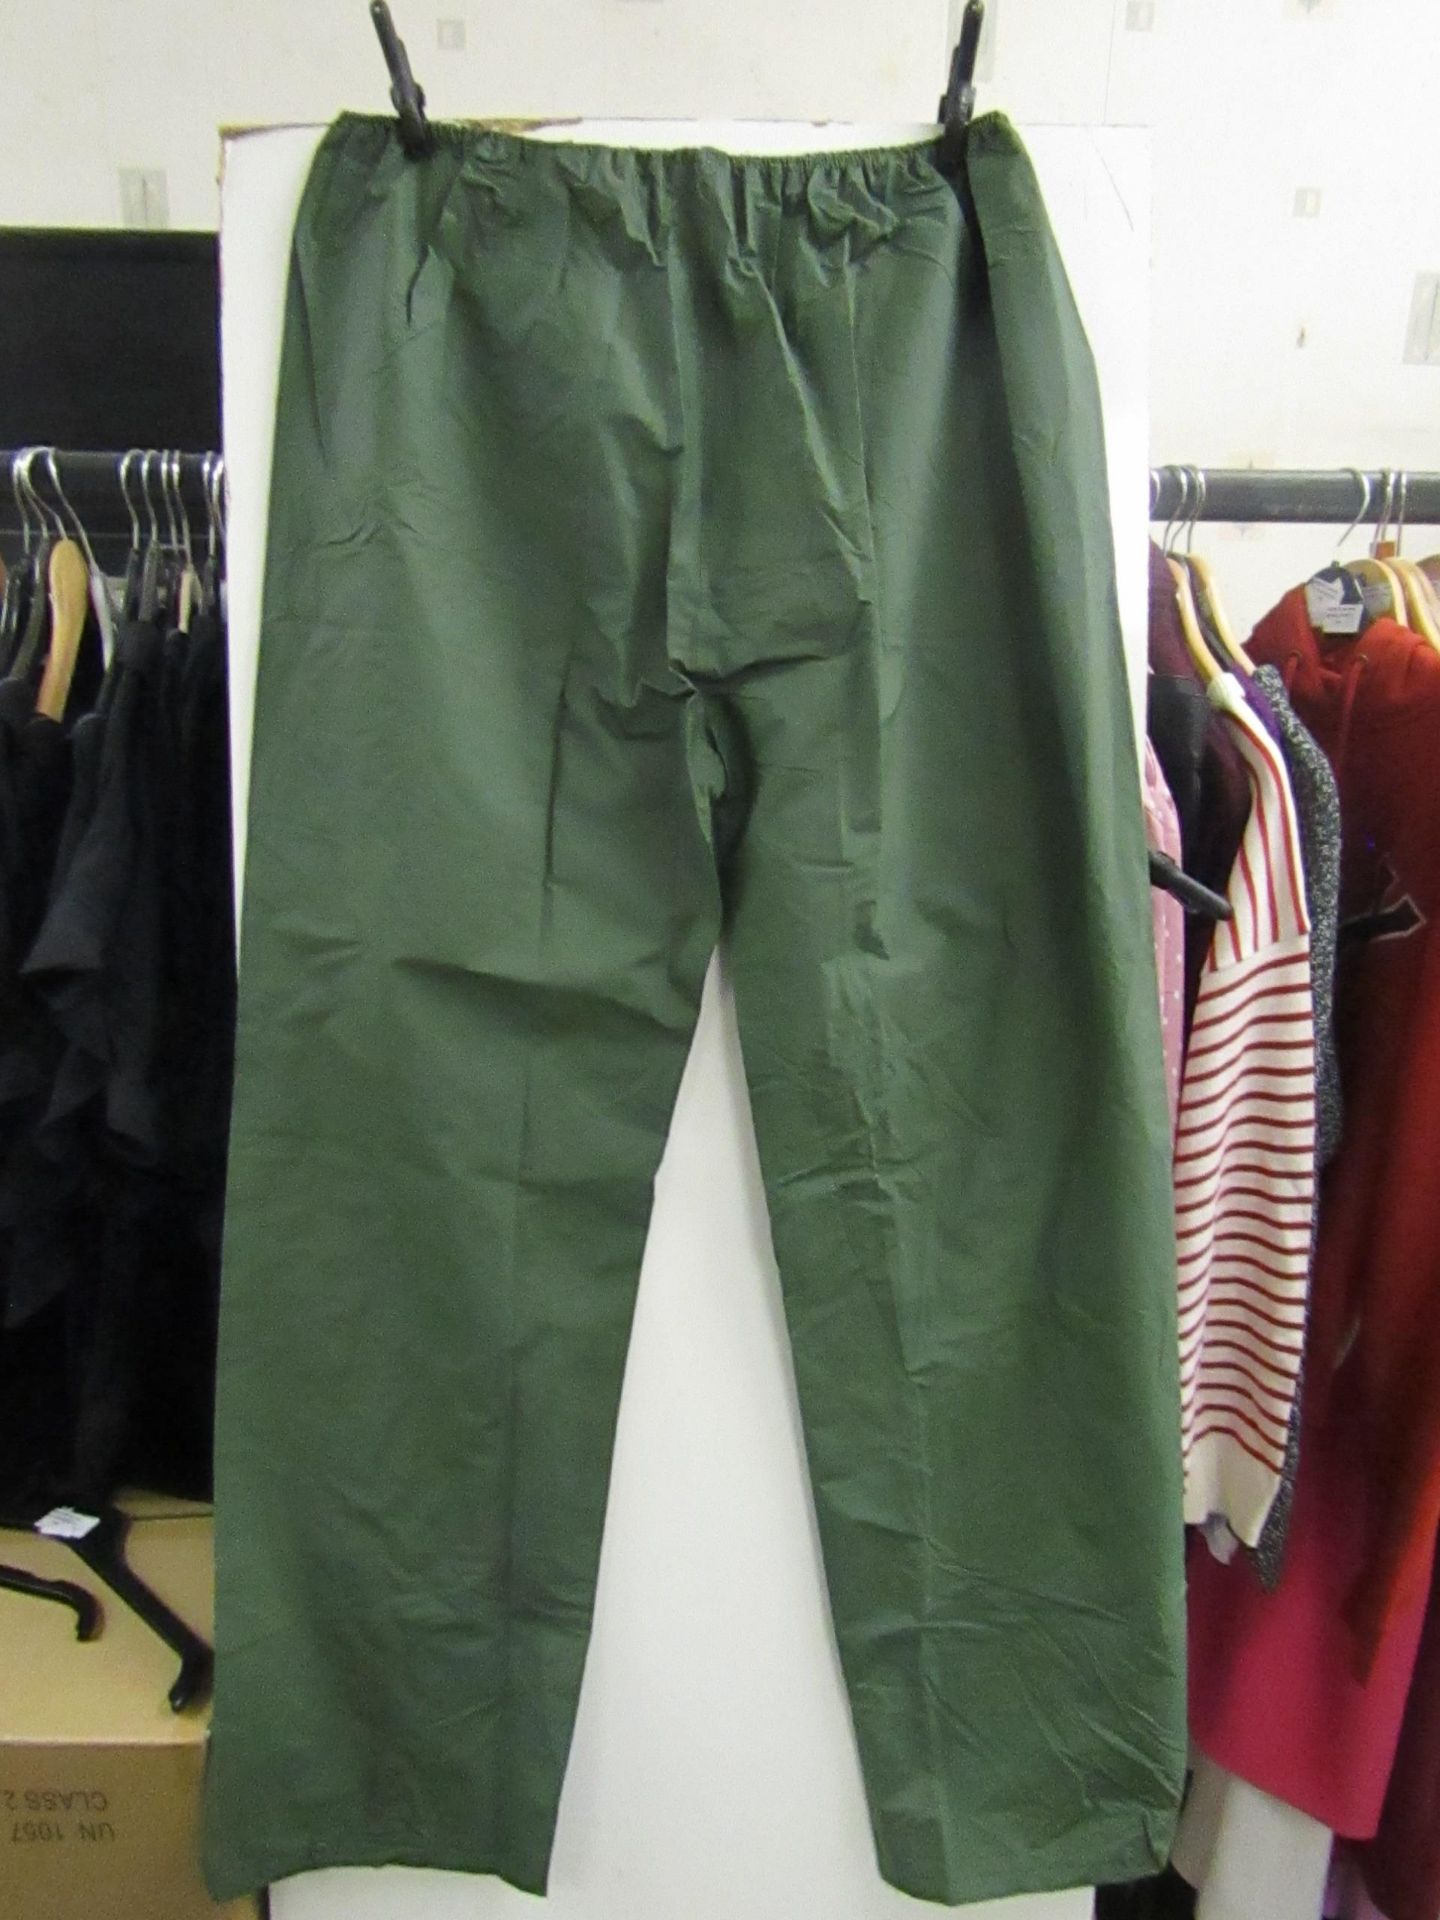 Hiking goods adult trousers, no pockets, adjustable trouser legs, size XL, new & packaged.